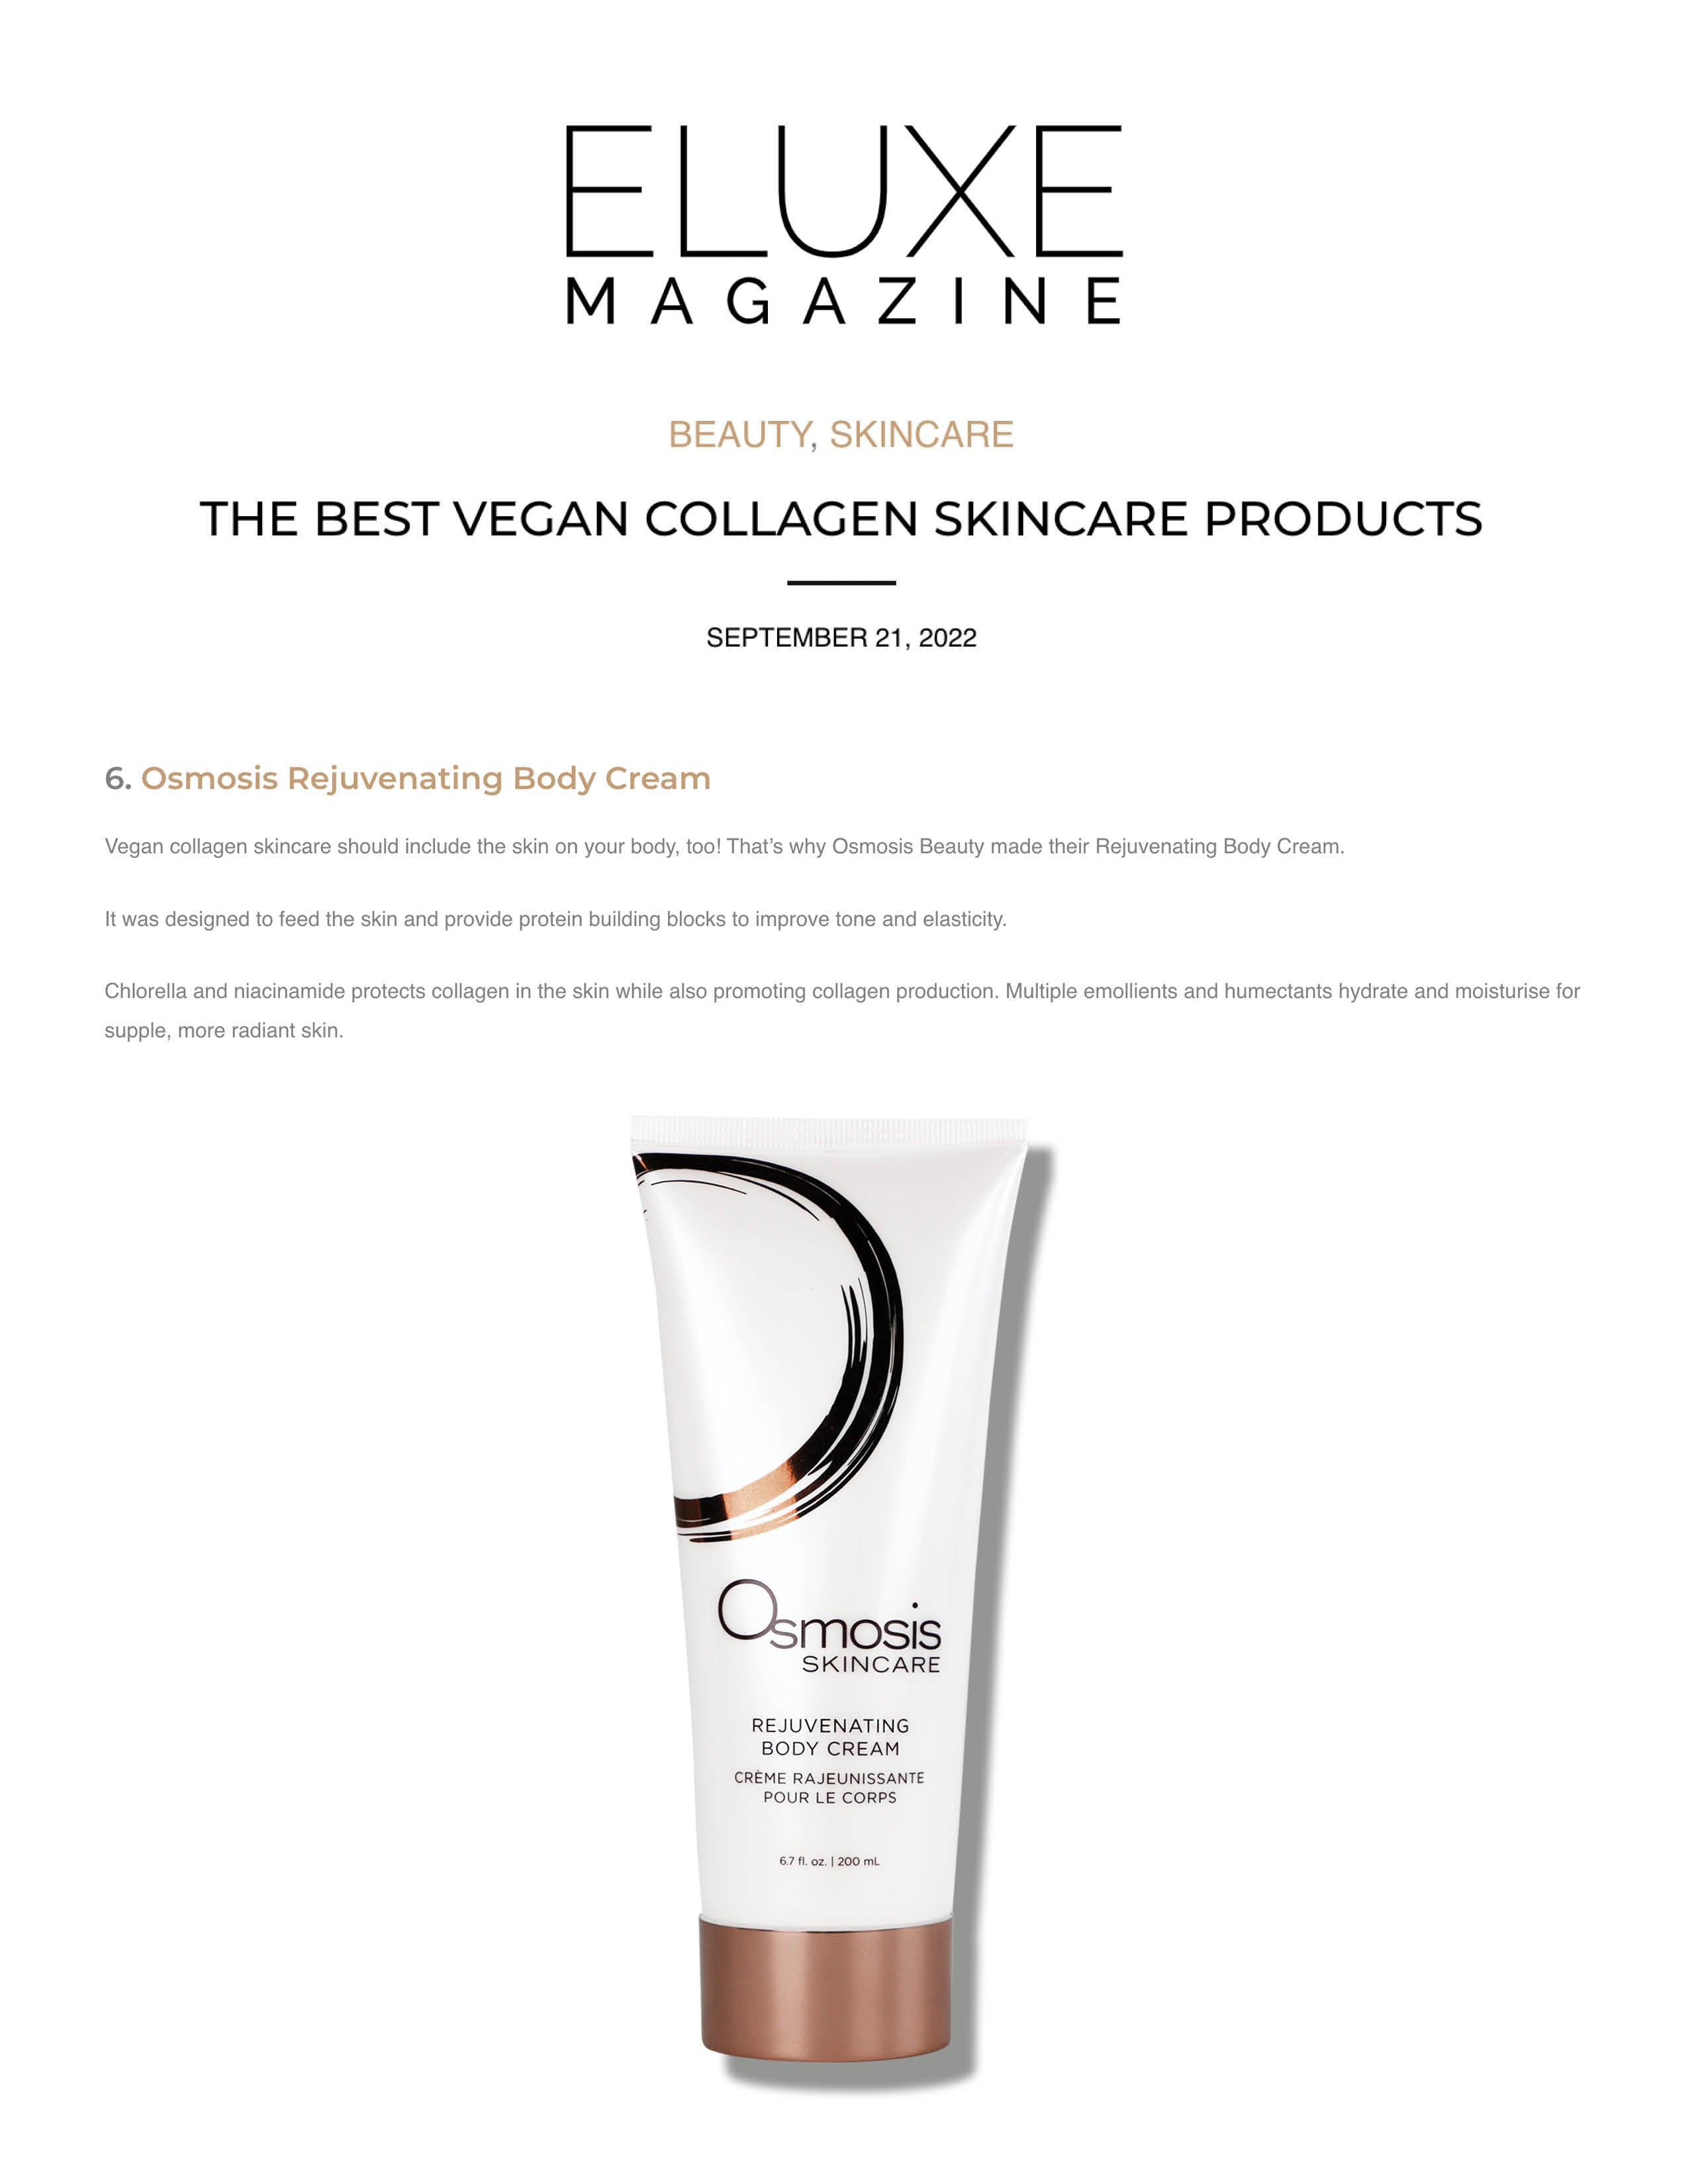 Rejuvenating Body Cream was featured in The Best Vegan Collagen Skincare Products.